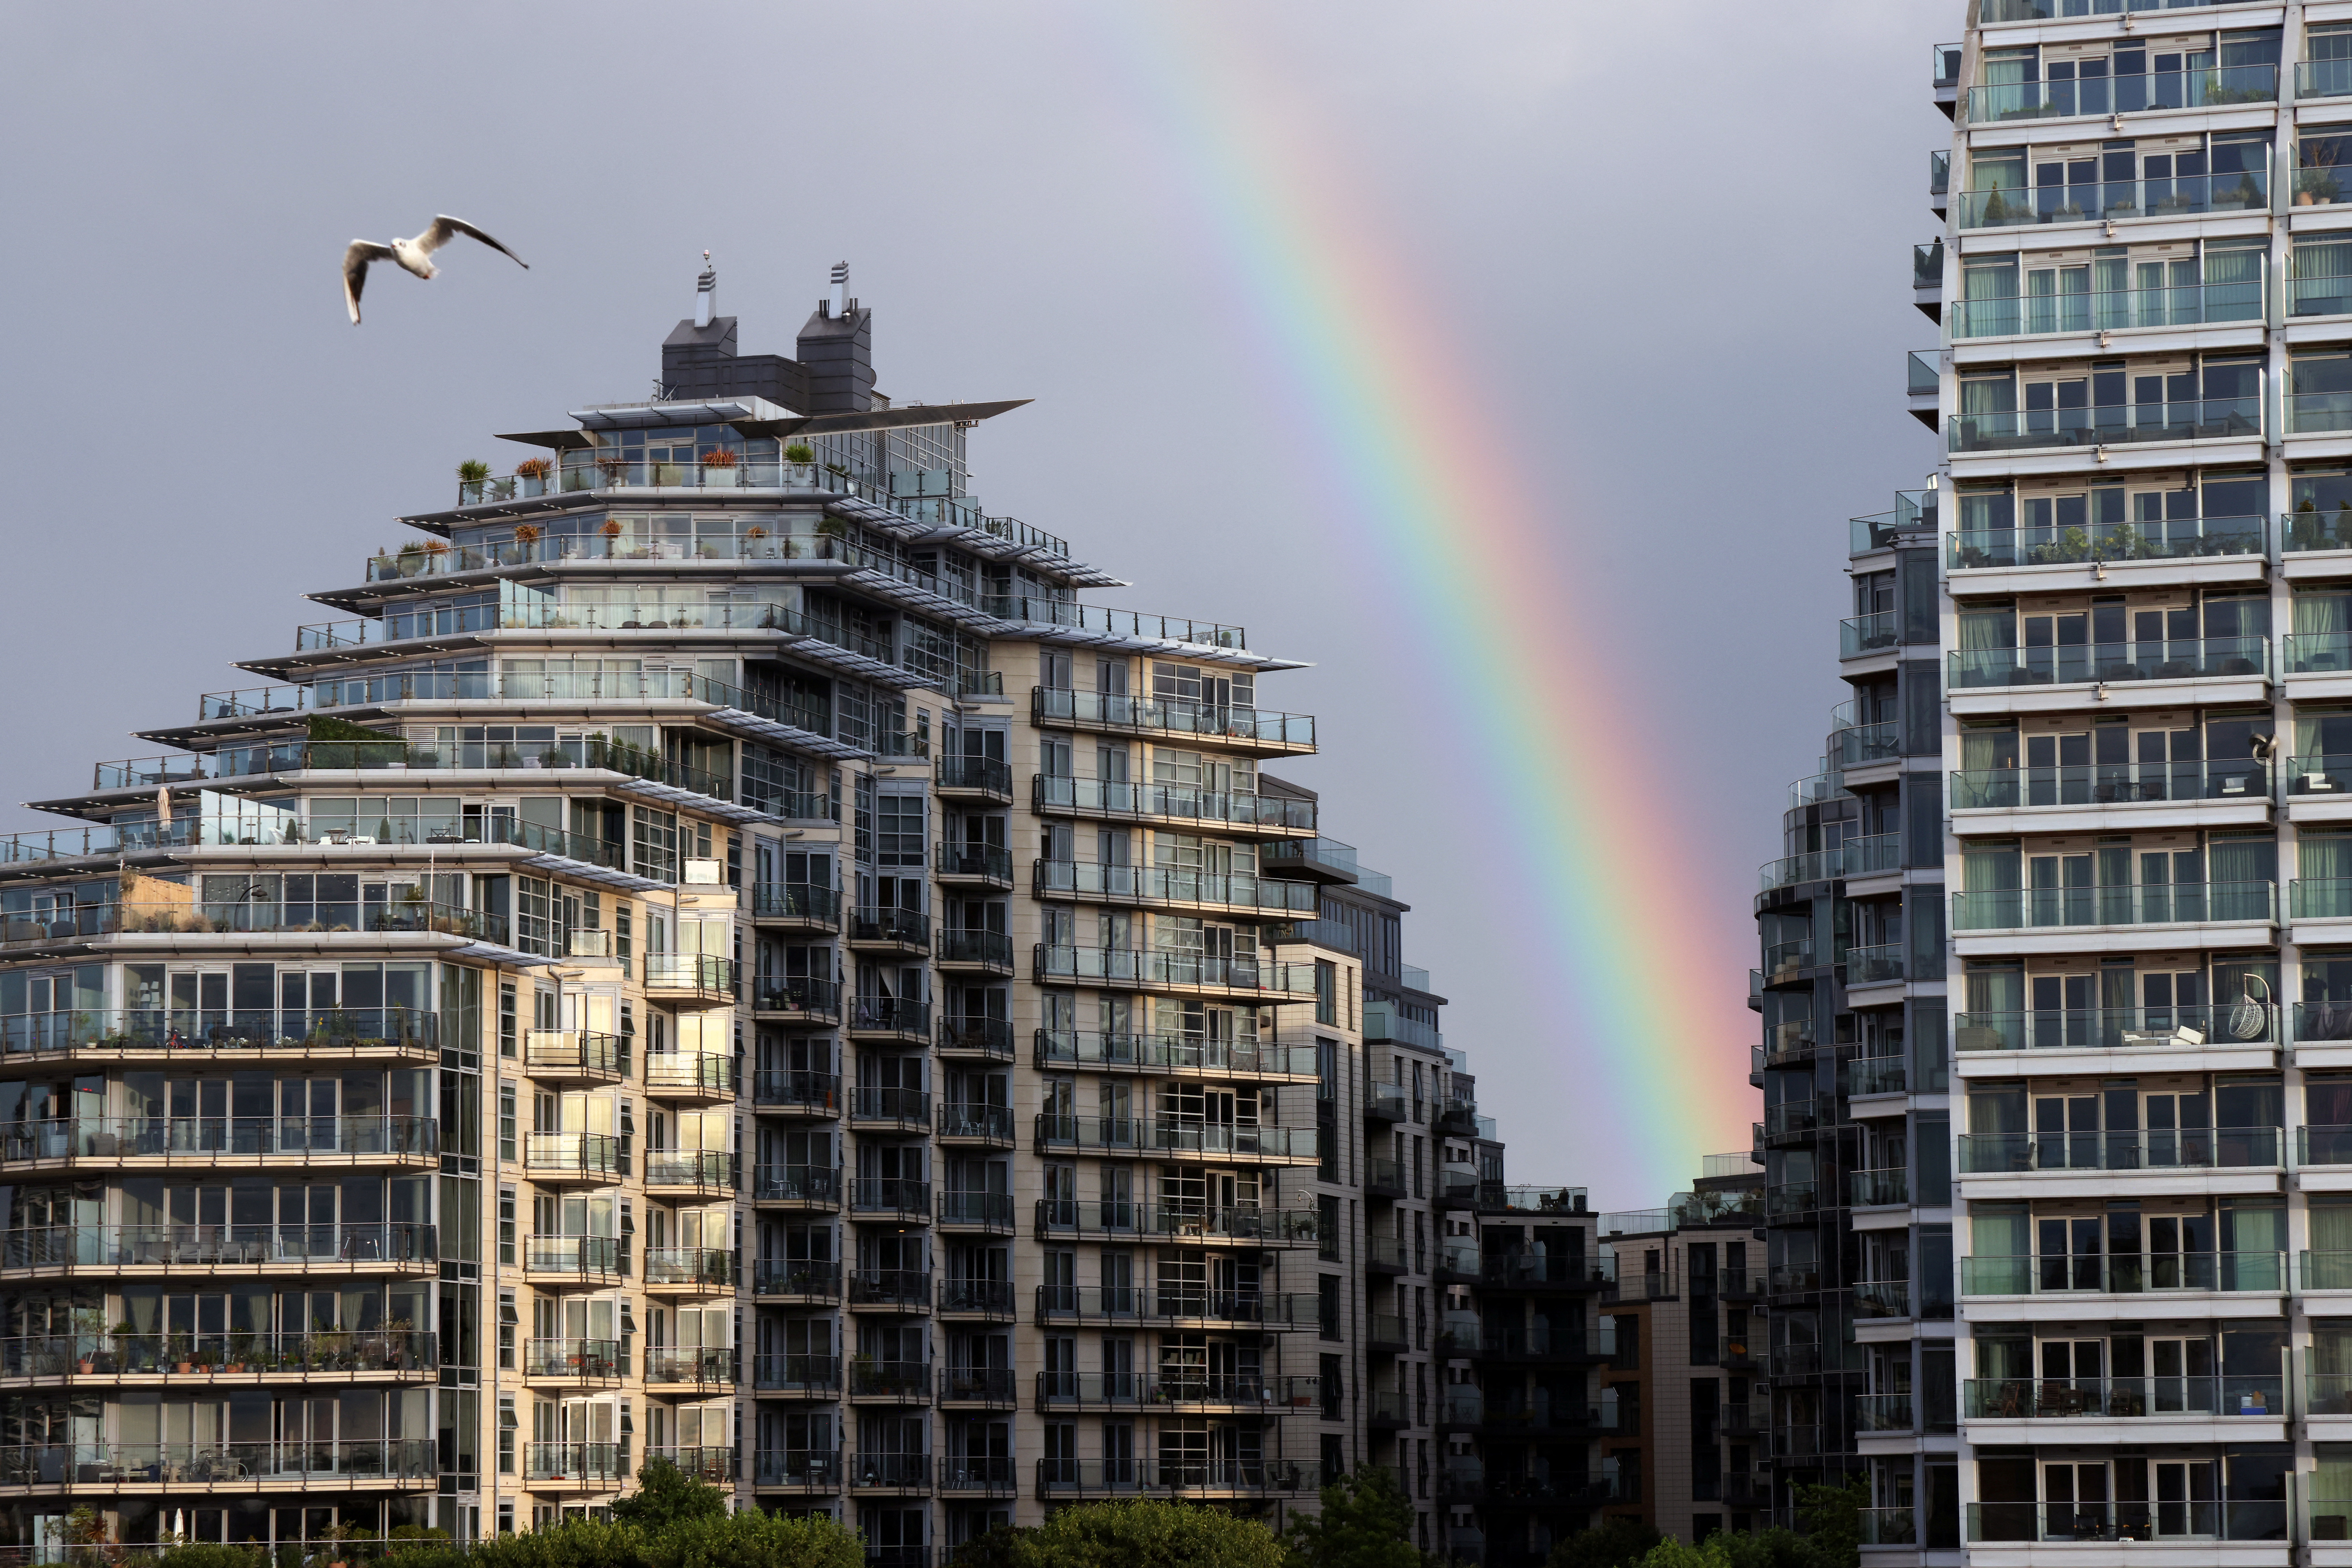 A rainbow is seen over apartments in Wandsworth on the River Thames